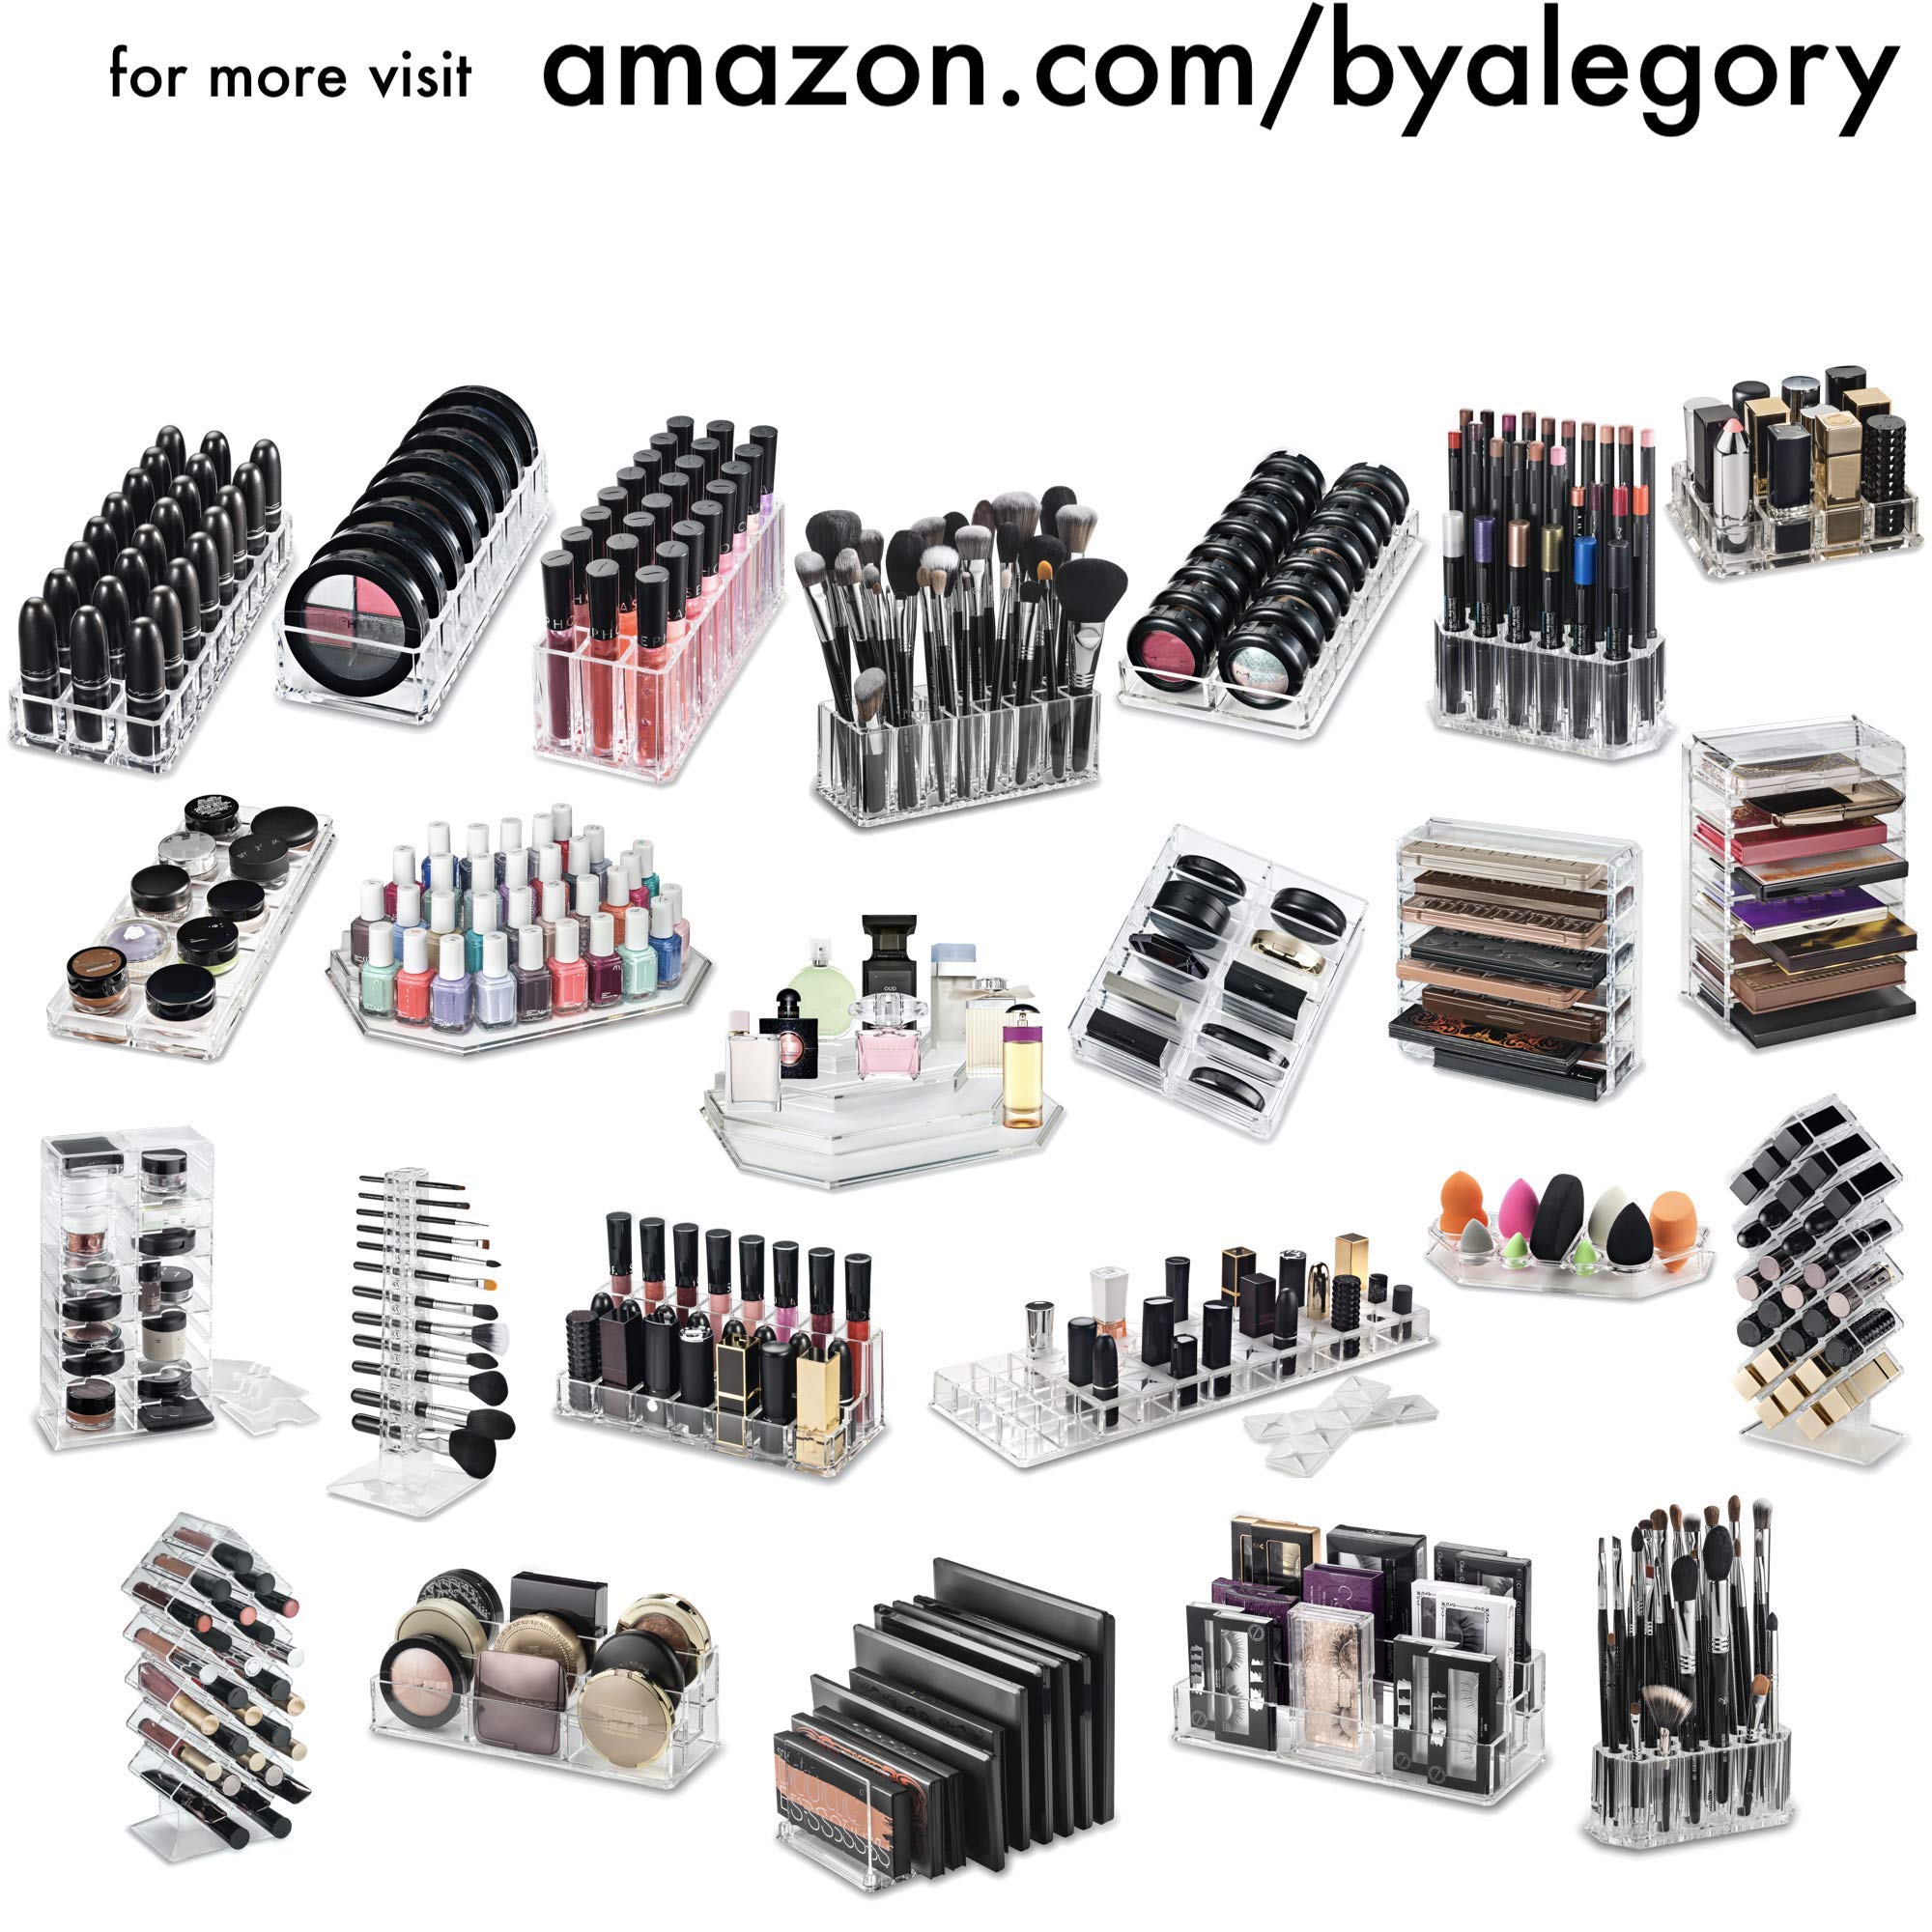 byAlegory Clear Lipstick Caps For MAC - Replaces Original Cap To See Your Favorite Lipstick Color Easily (12 Count)